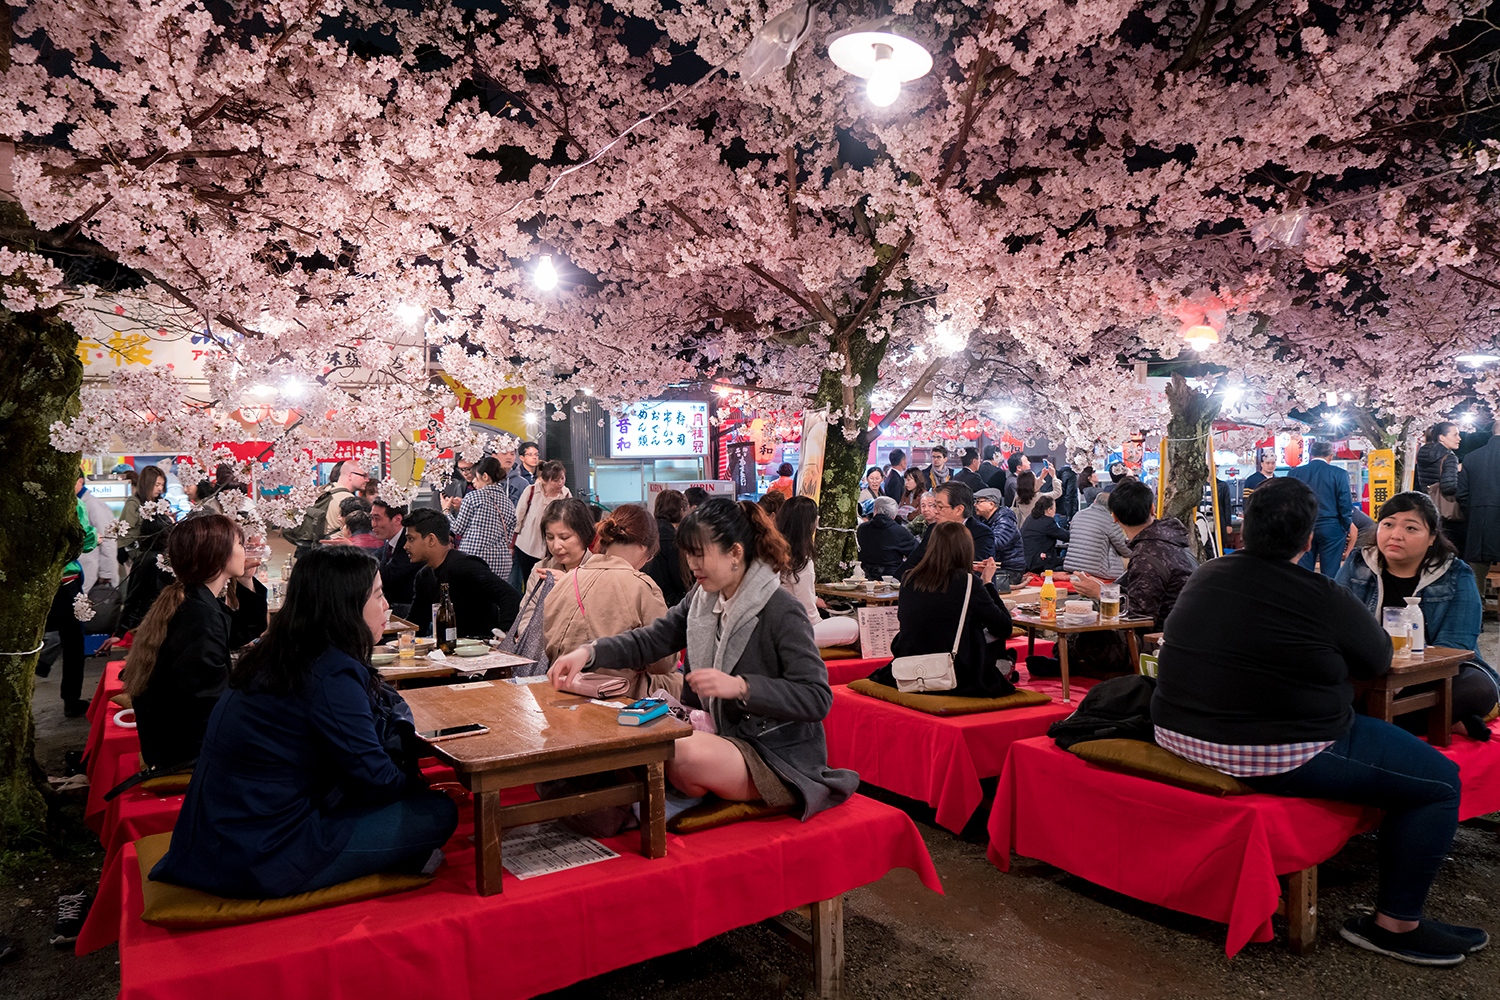 A group of festival-goers sit at tables next to food stalls at a sakura festival.